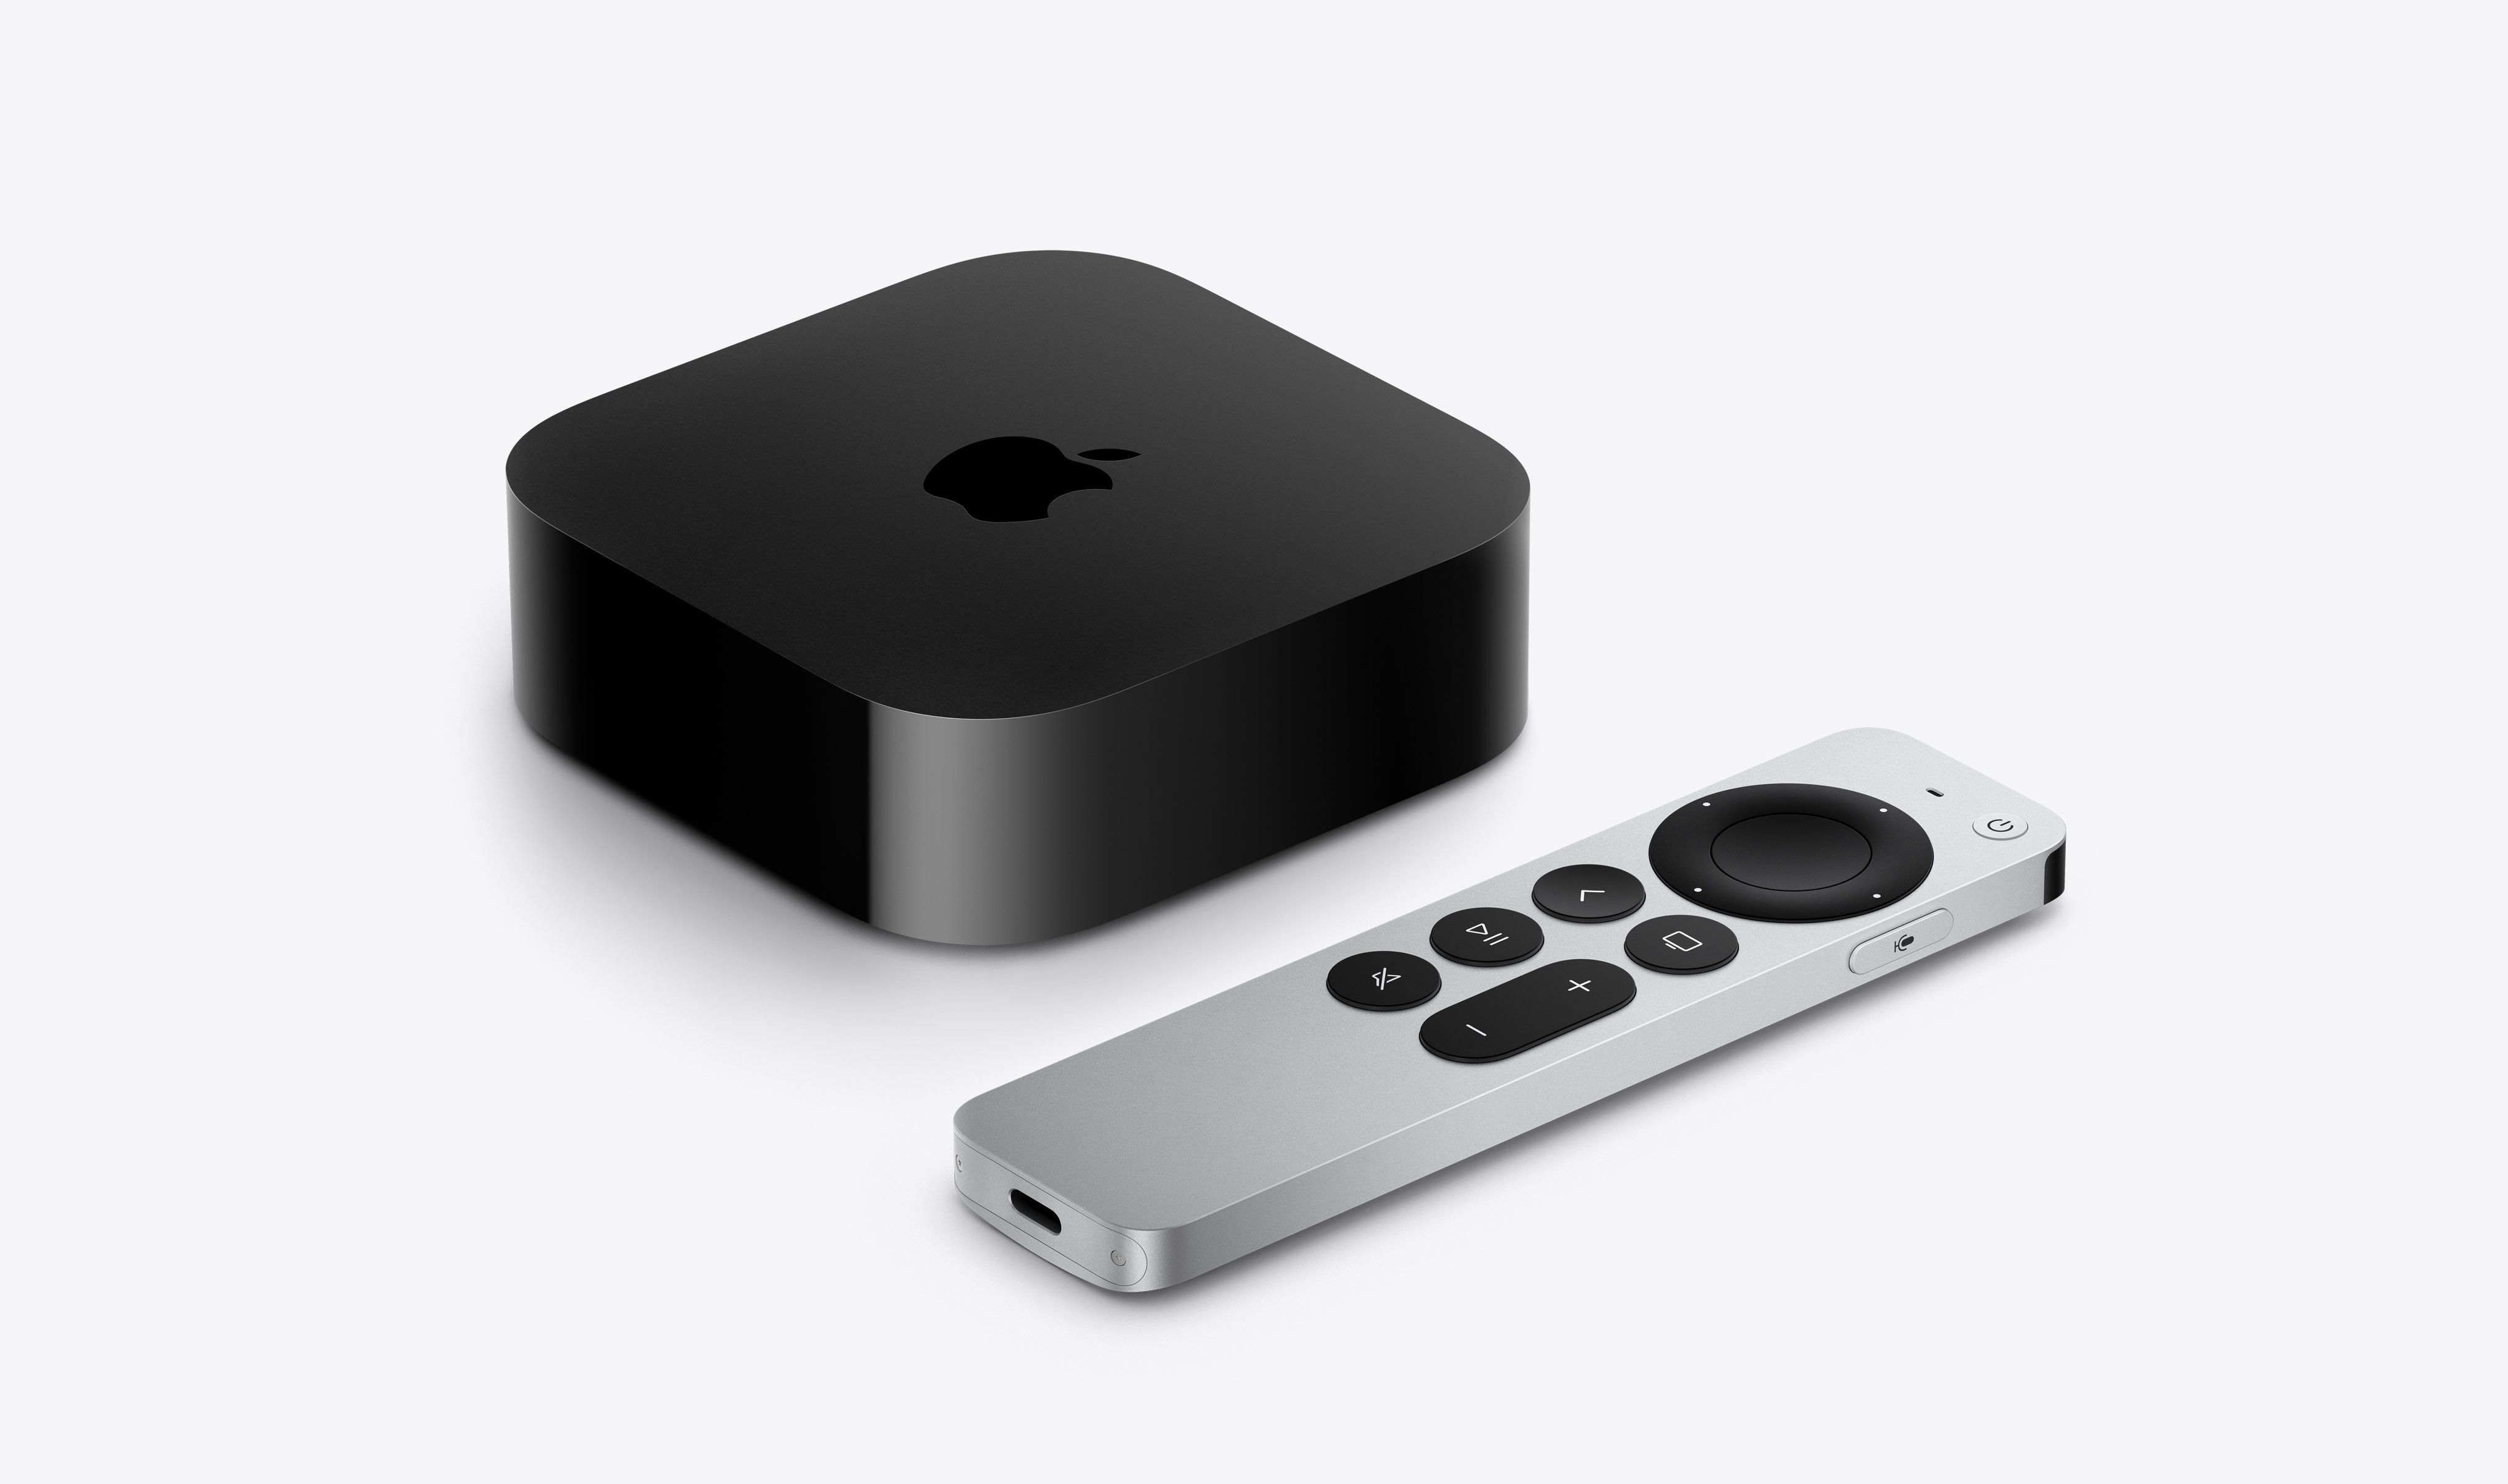 Next-Generation Apple TV Likely to Have Lower Sub-$100 Price - MacRumors